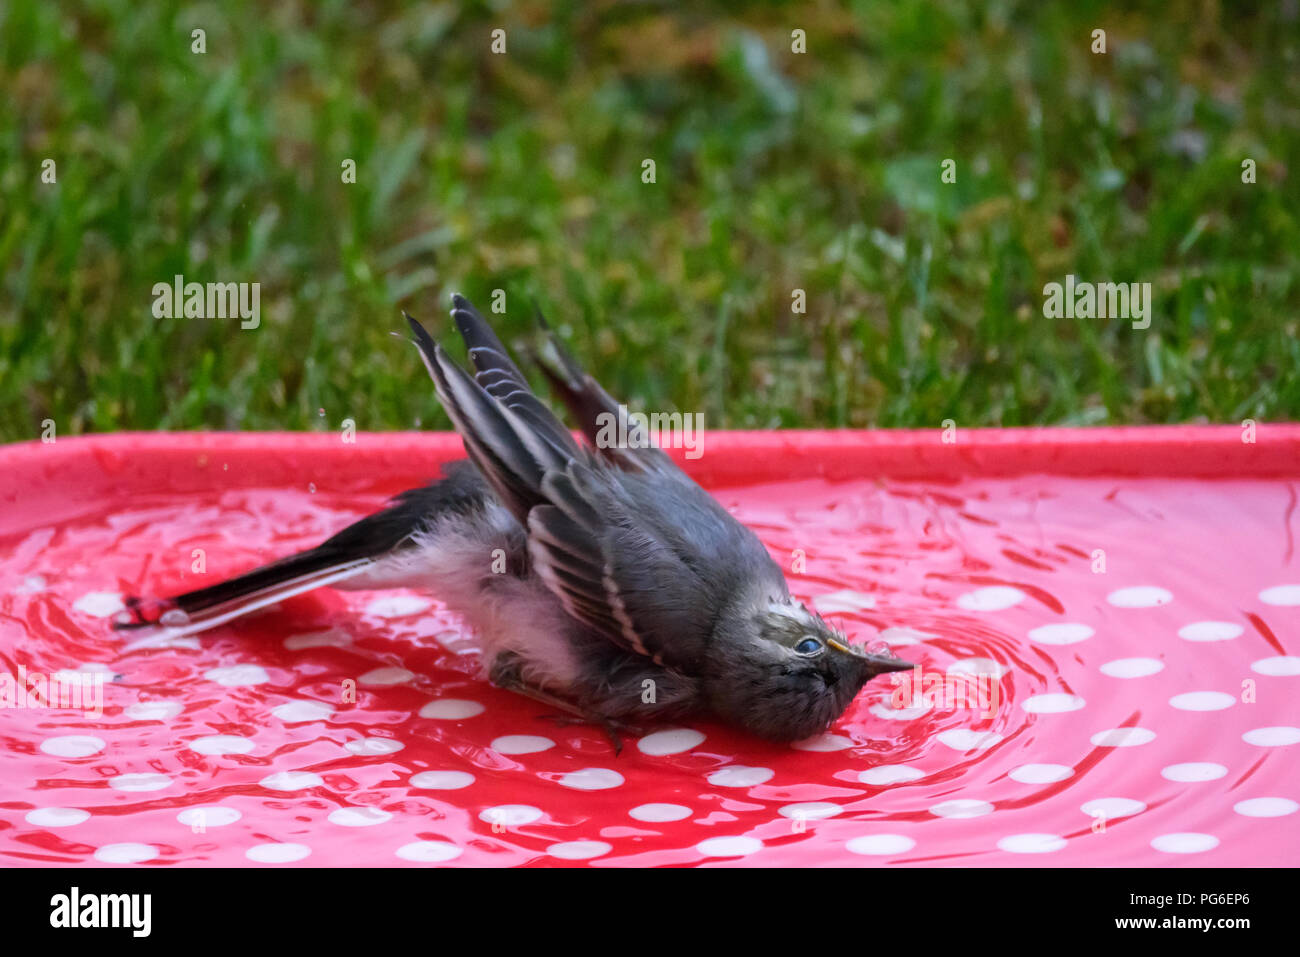 Baby white wagtail (Motacilla alba) bird washing in water on red plastic tray. Stock Photo